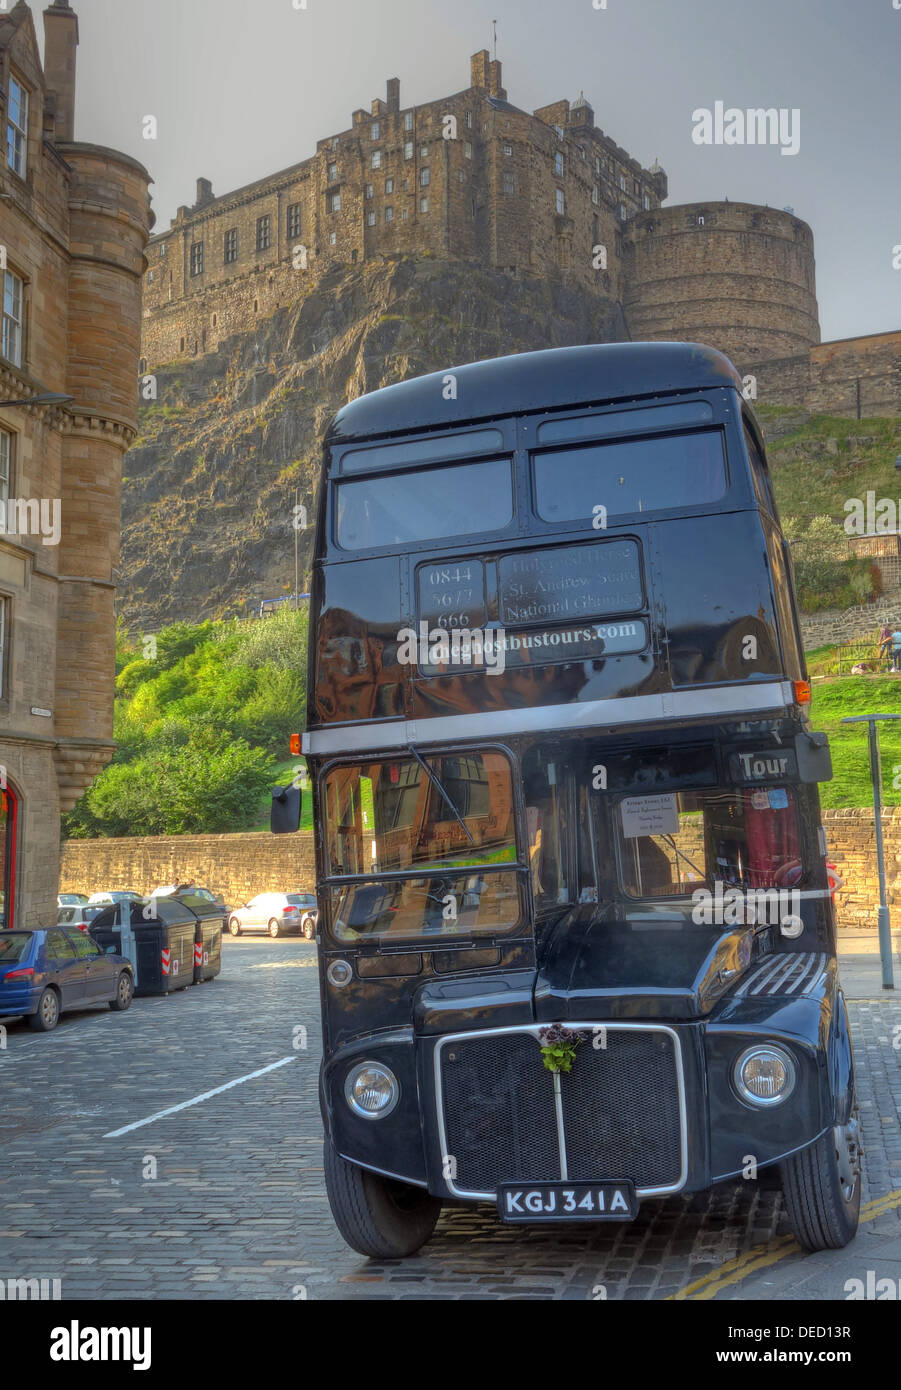 The black London Necrobus, Ghost tours, in Edinburgh, Scotland, UK with old town castle behind. Stock Photo